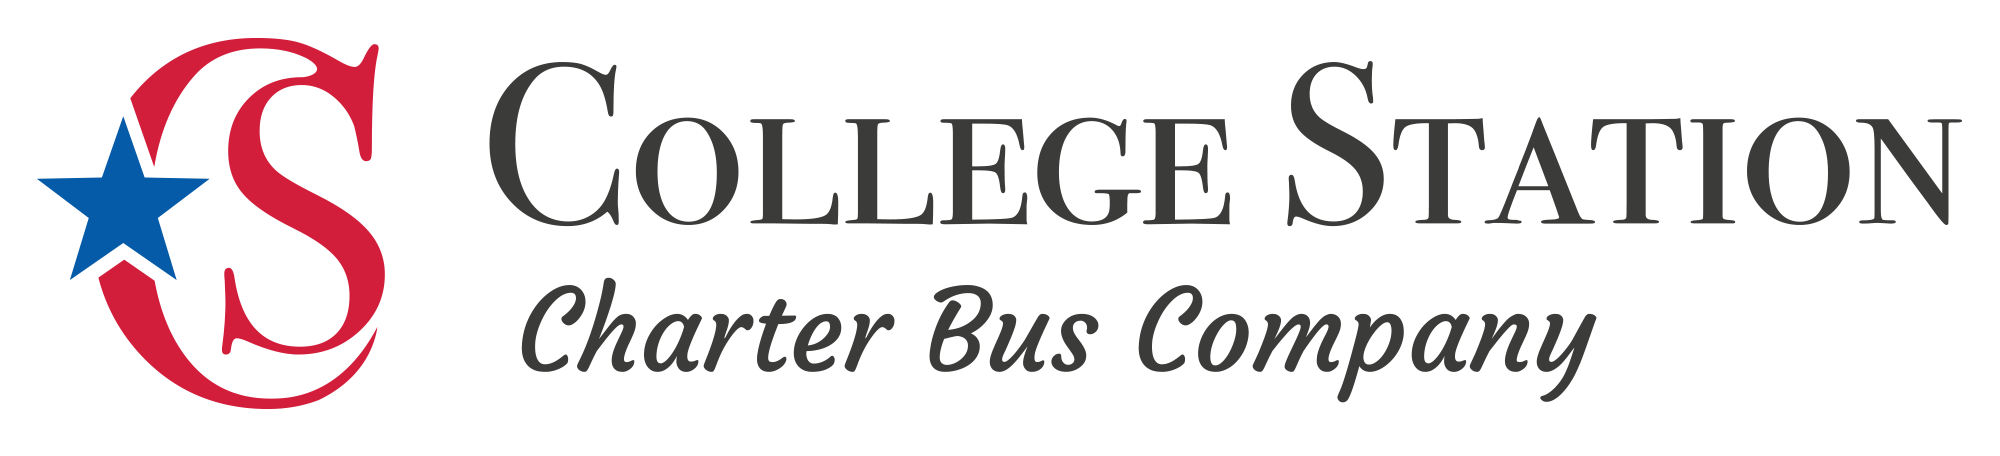 College Station Charter Bus Company